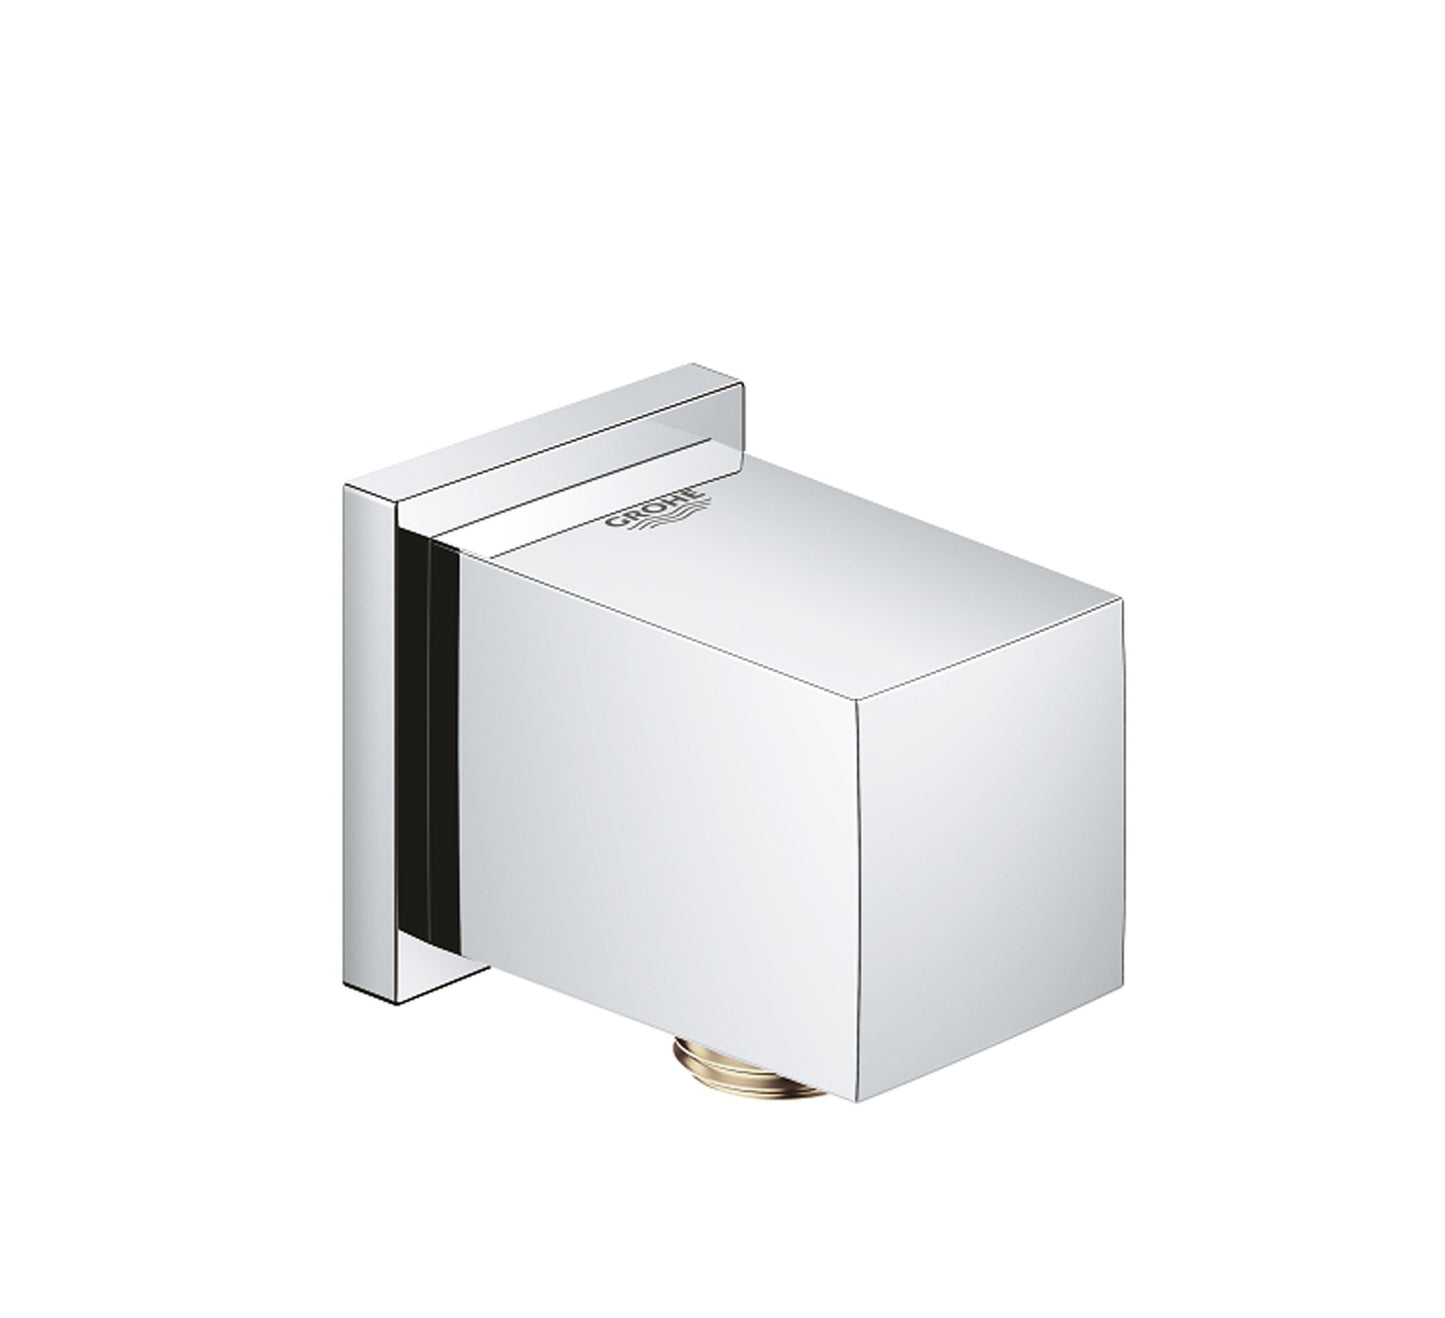 GROHE EUPHORIA CUBE SHOWER OUTLET ELBOW 1/2 "- 27704000 - Tadmur Trading